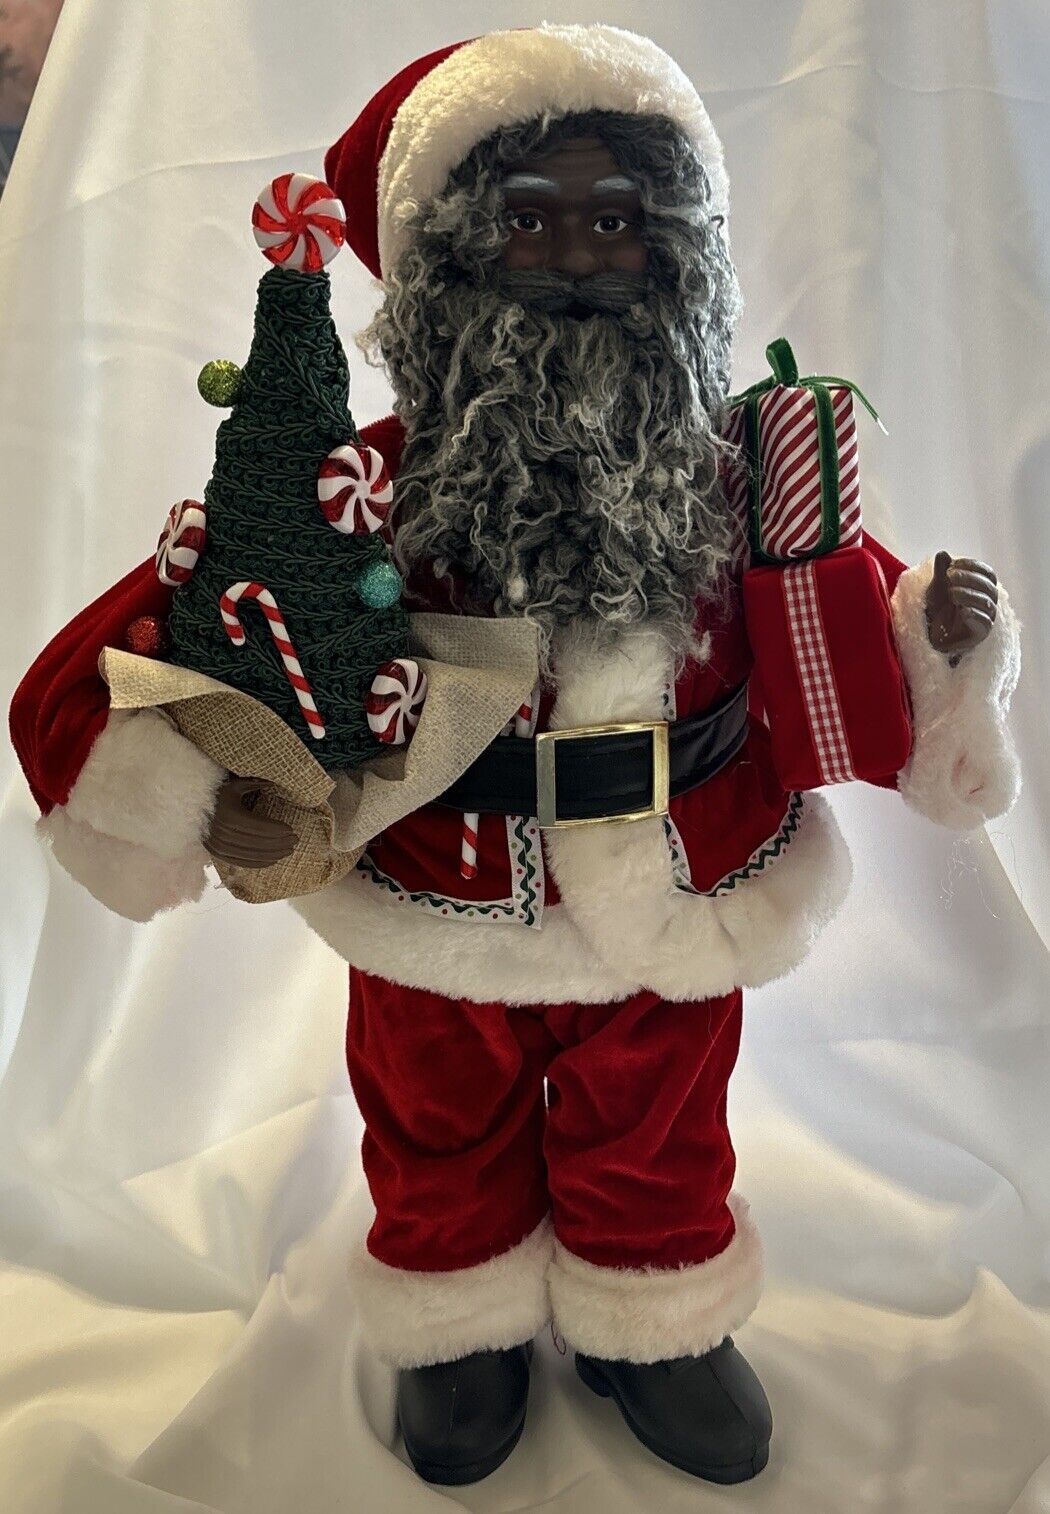 New African American Santa Claus figurine 18” Holding Gifts And Christmas Tree